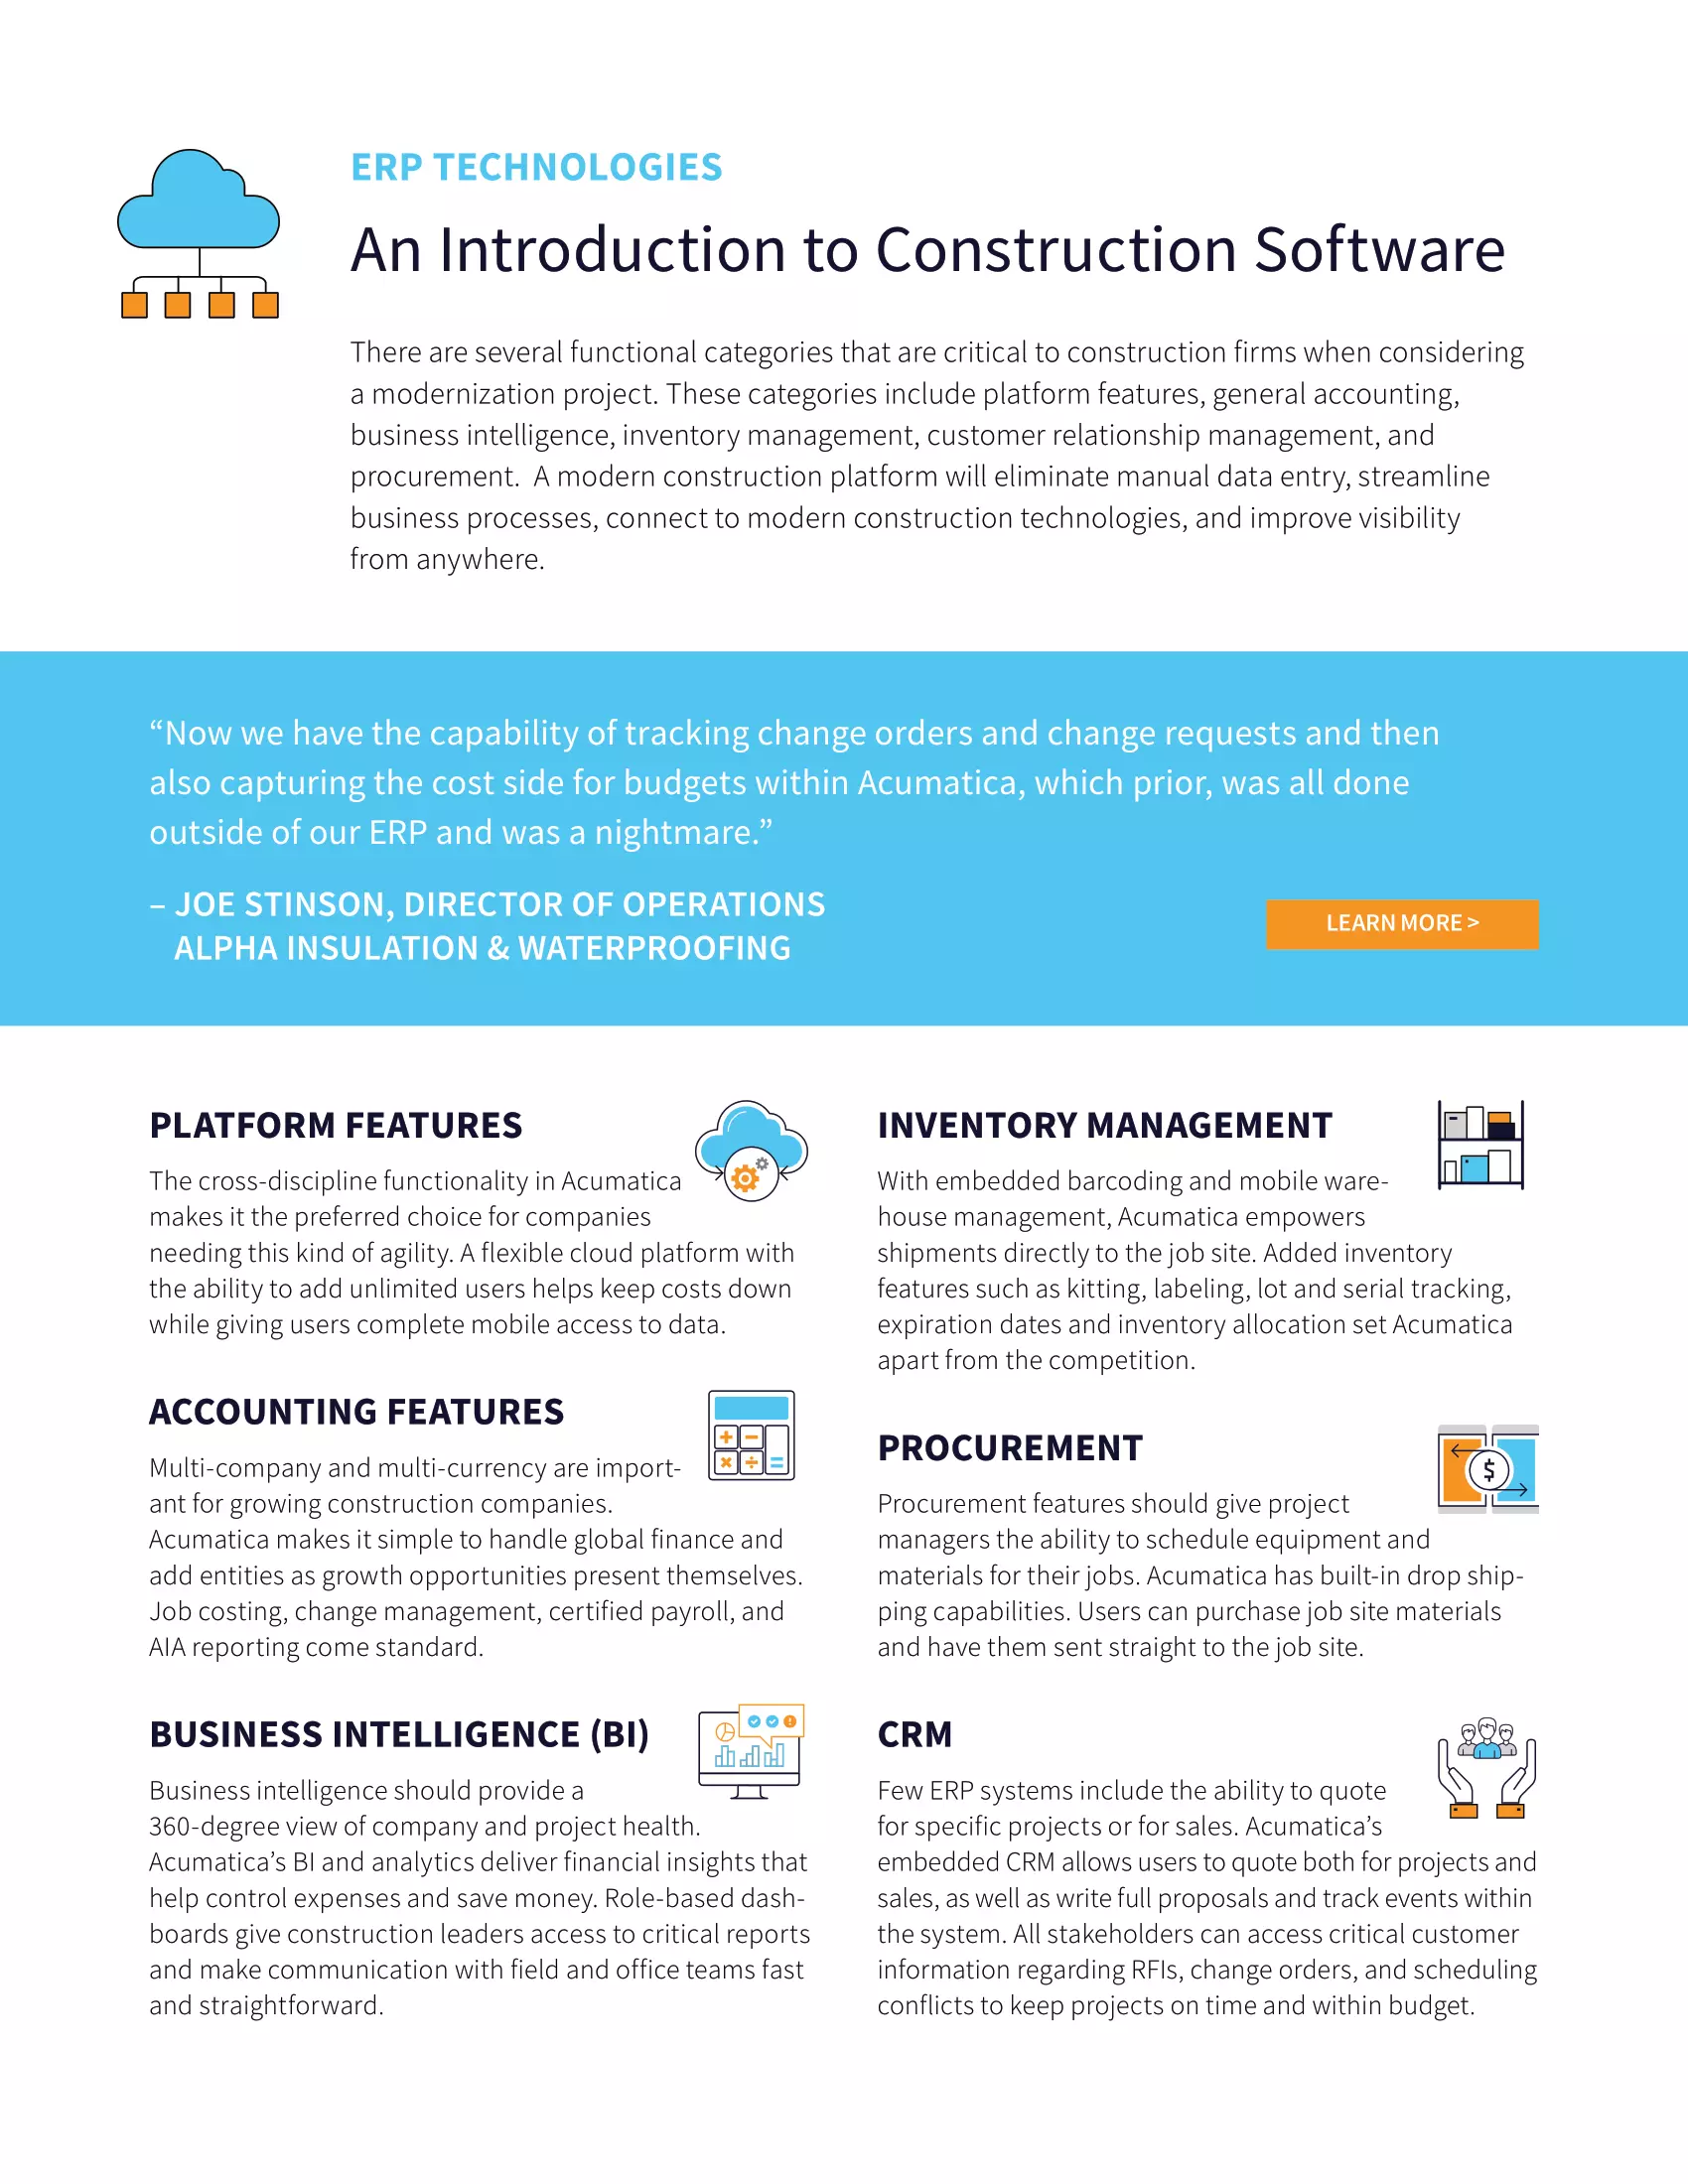 Digital Transformation in Construction: A Must for Growing Construction Businesses, page 1